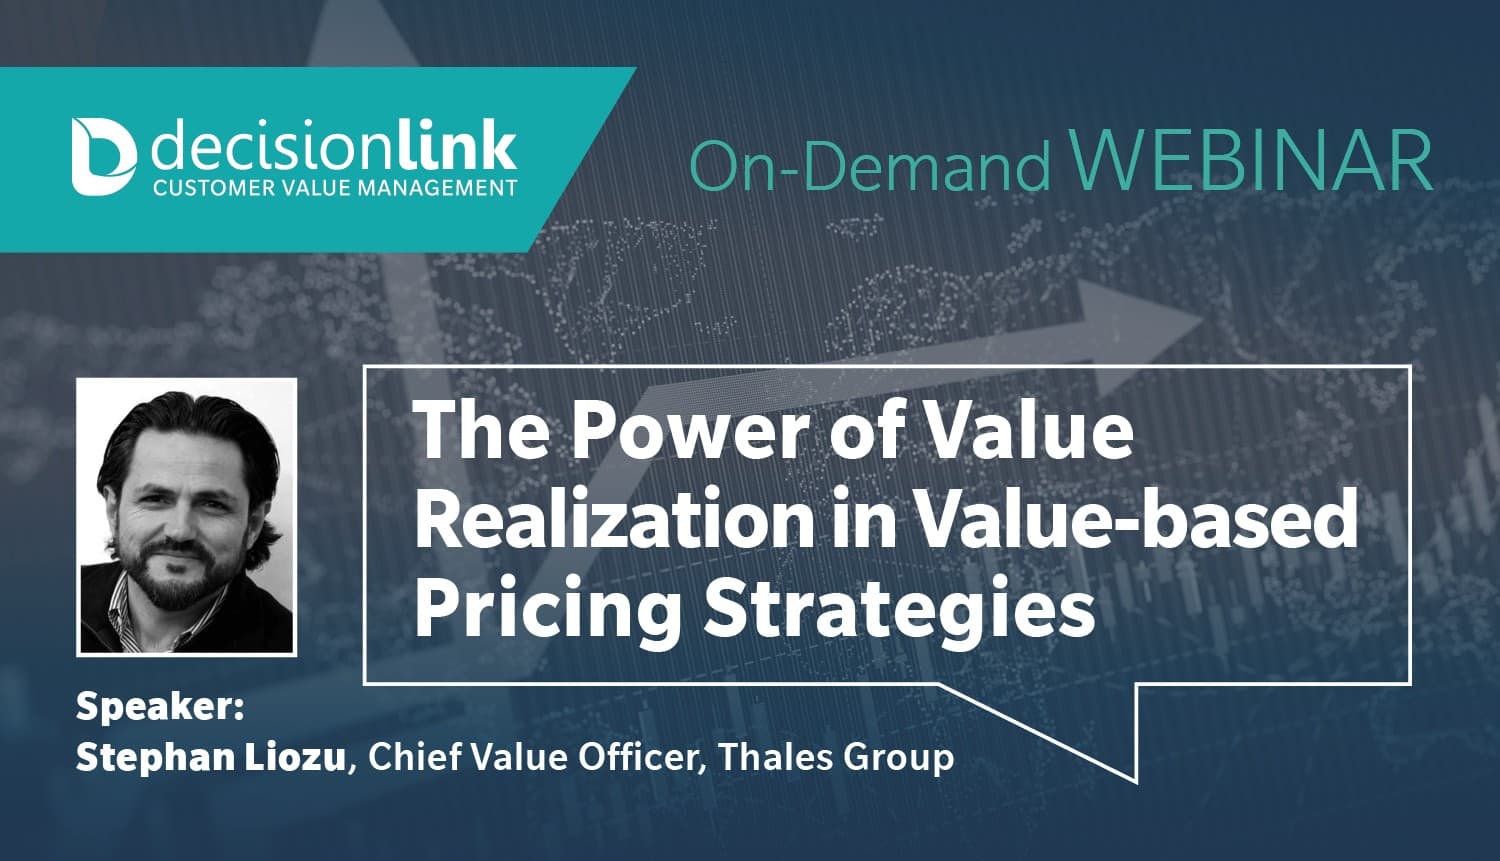 The Power of Value Realization in Value-based Pricing Strategies